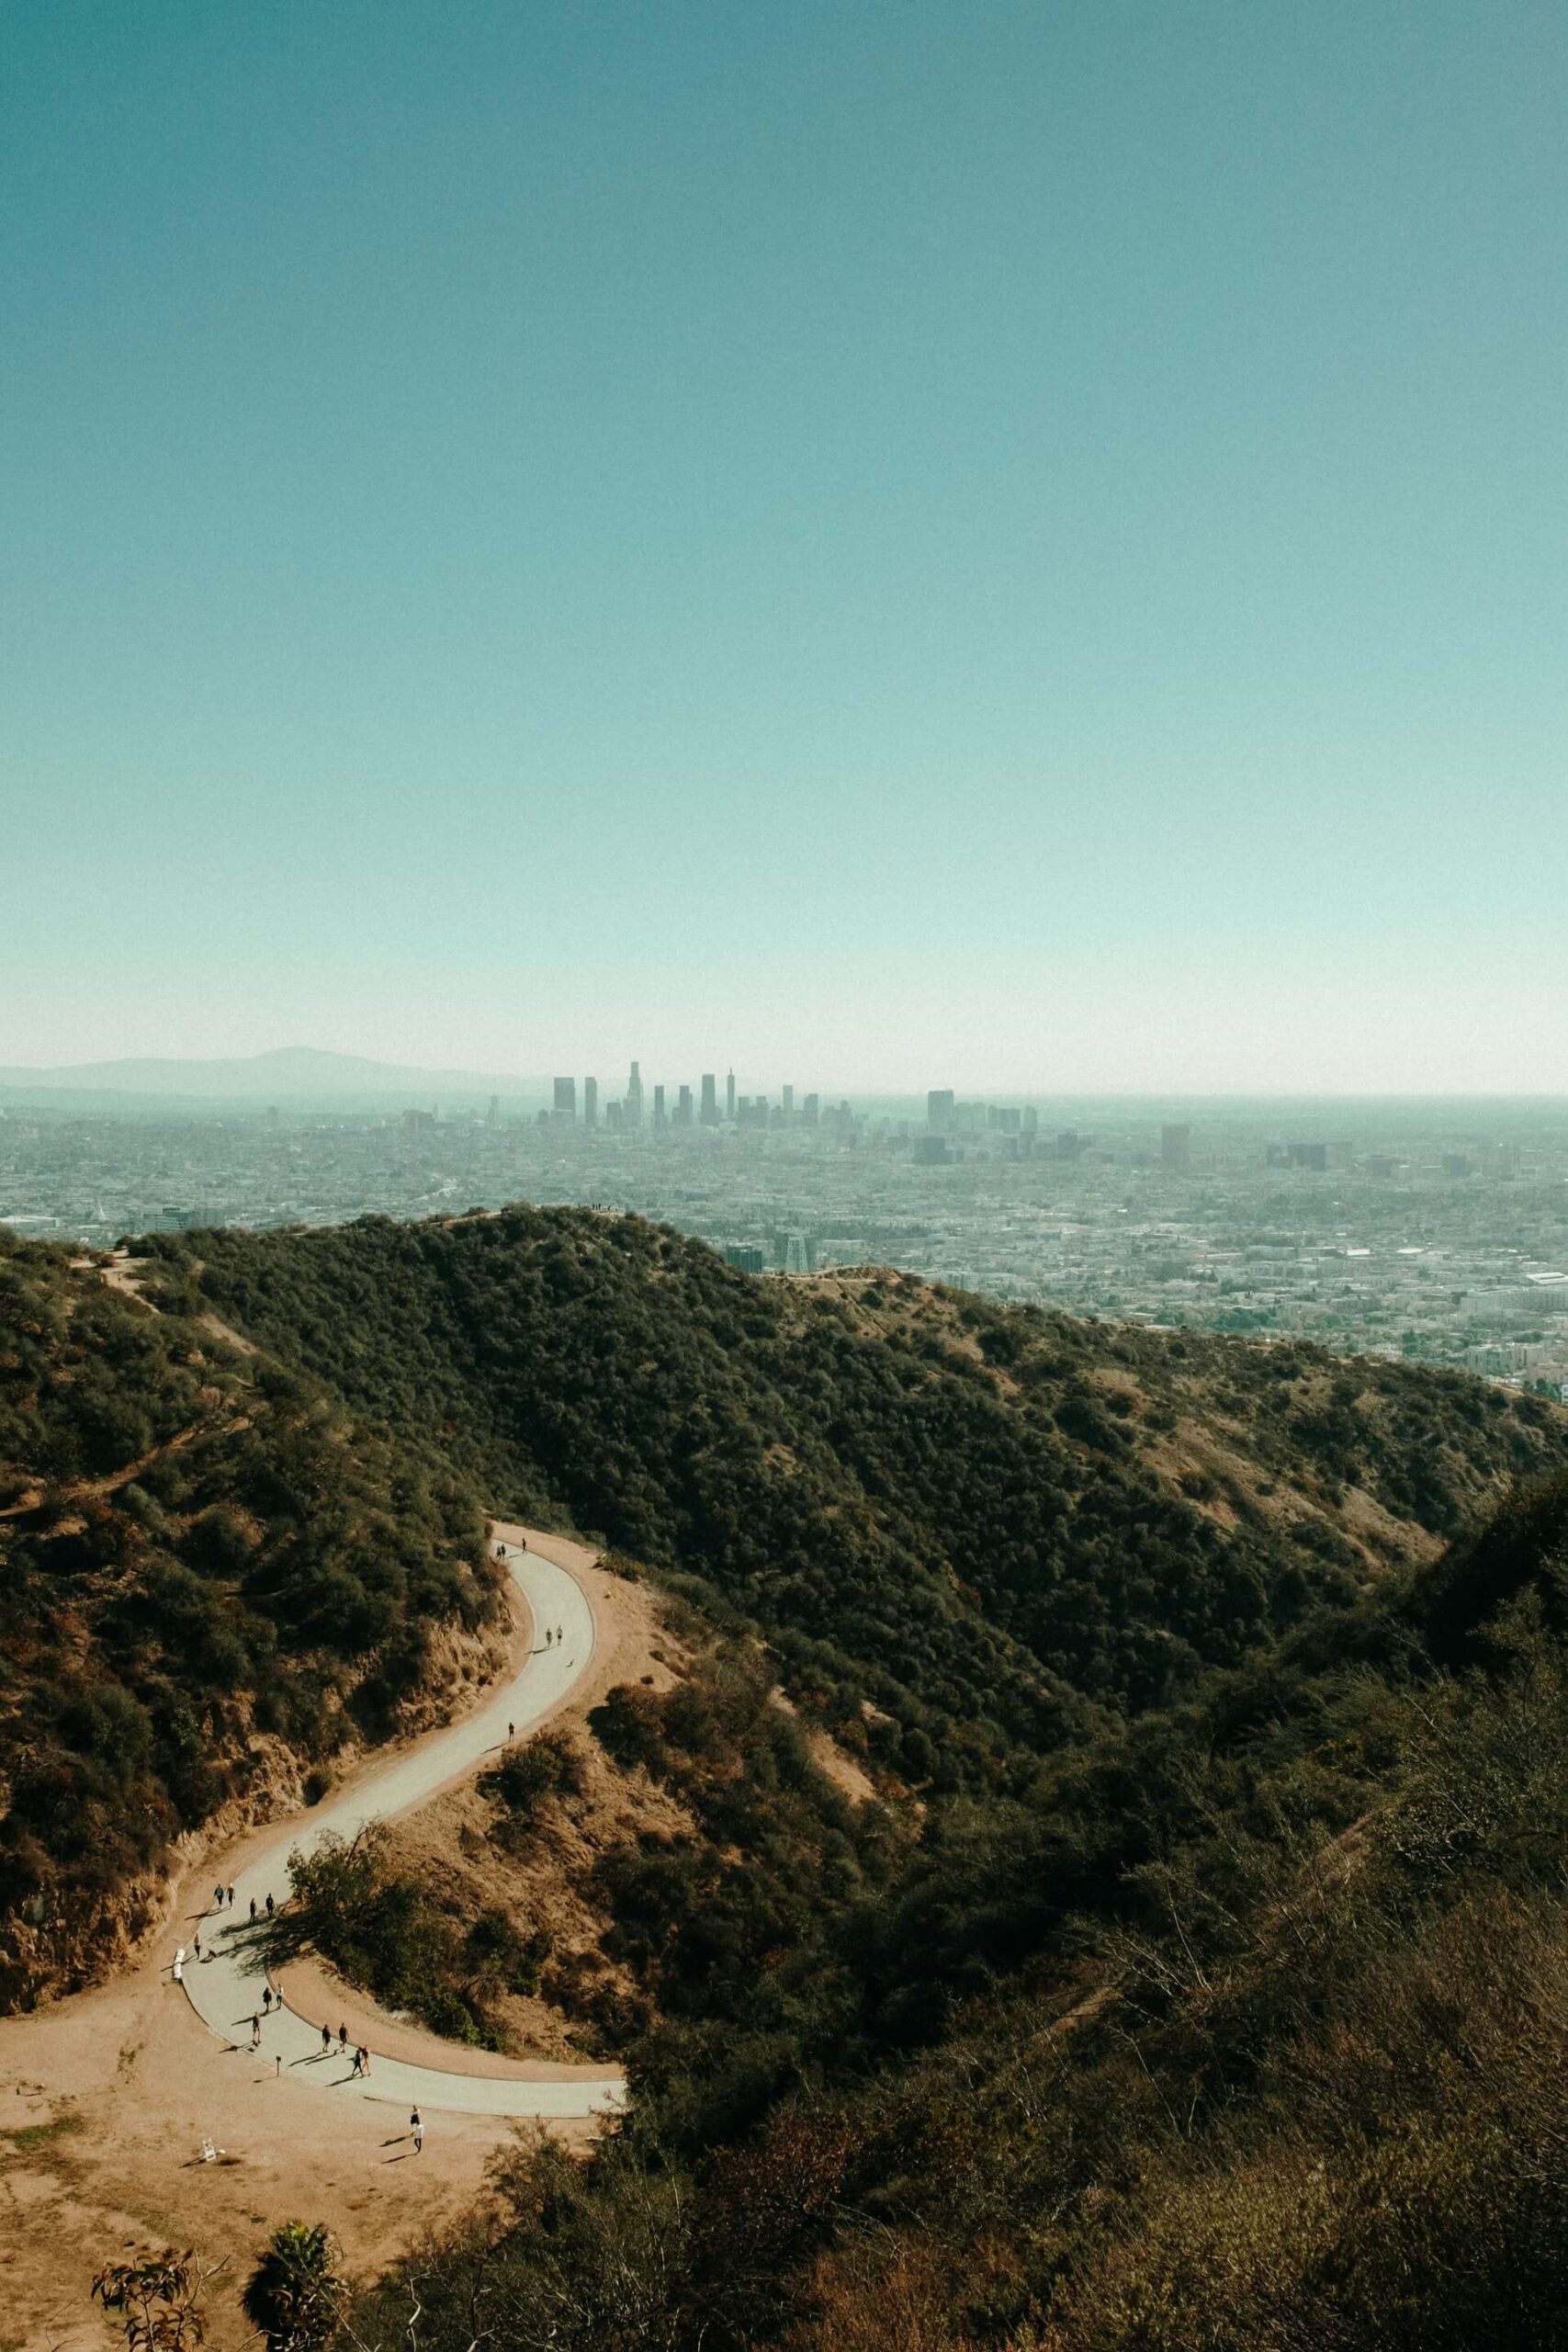 los angeles skyline in the background with green rugged mountain trail up front